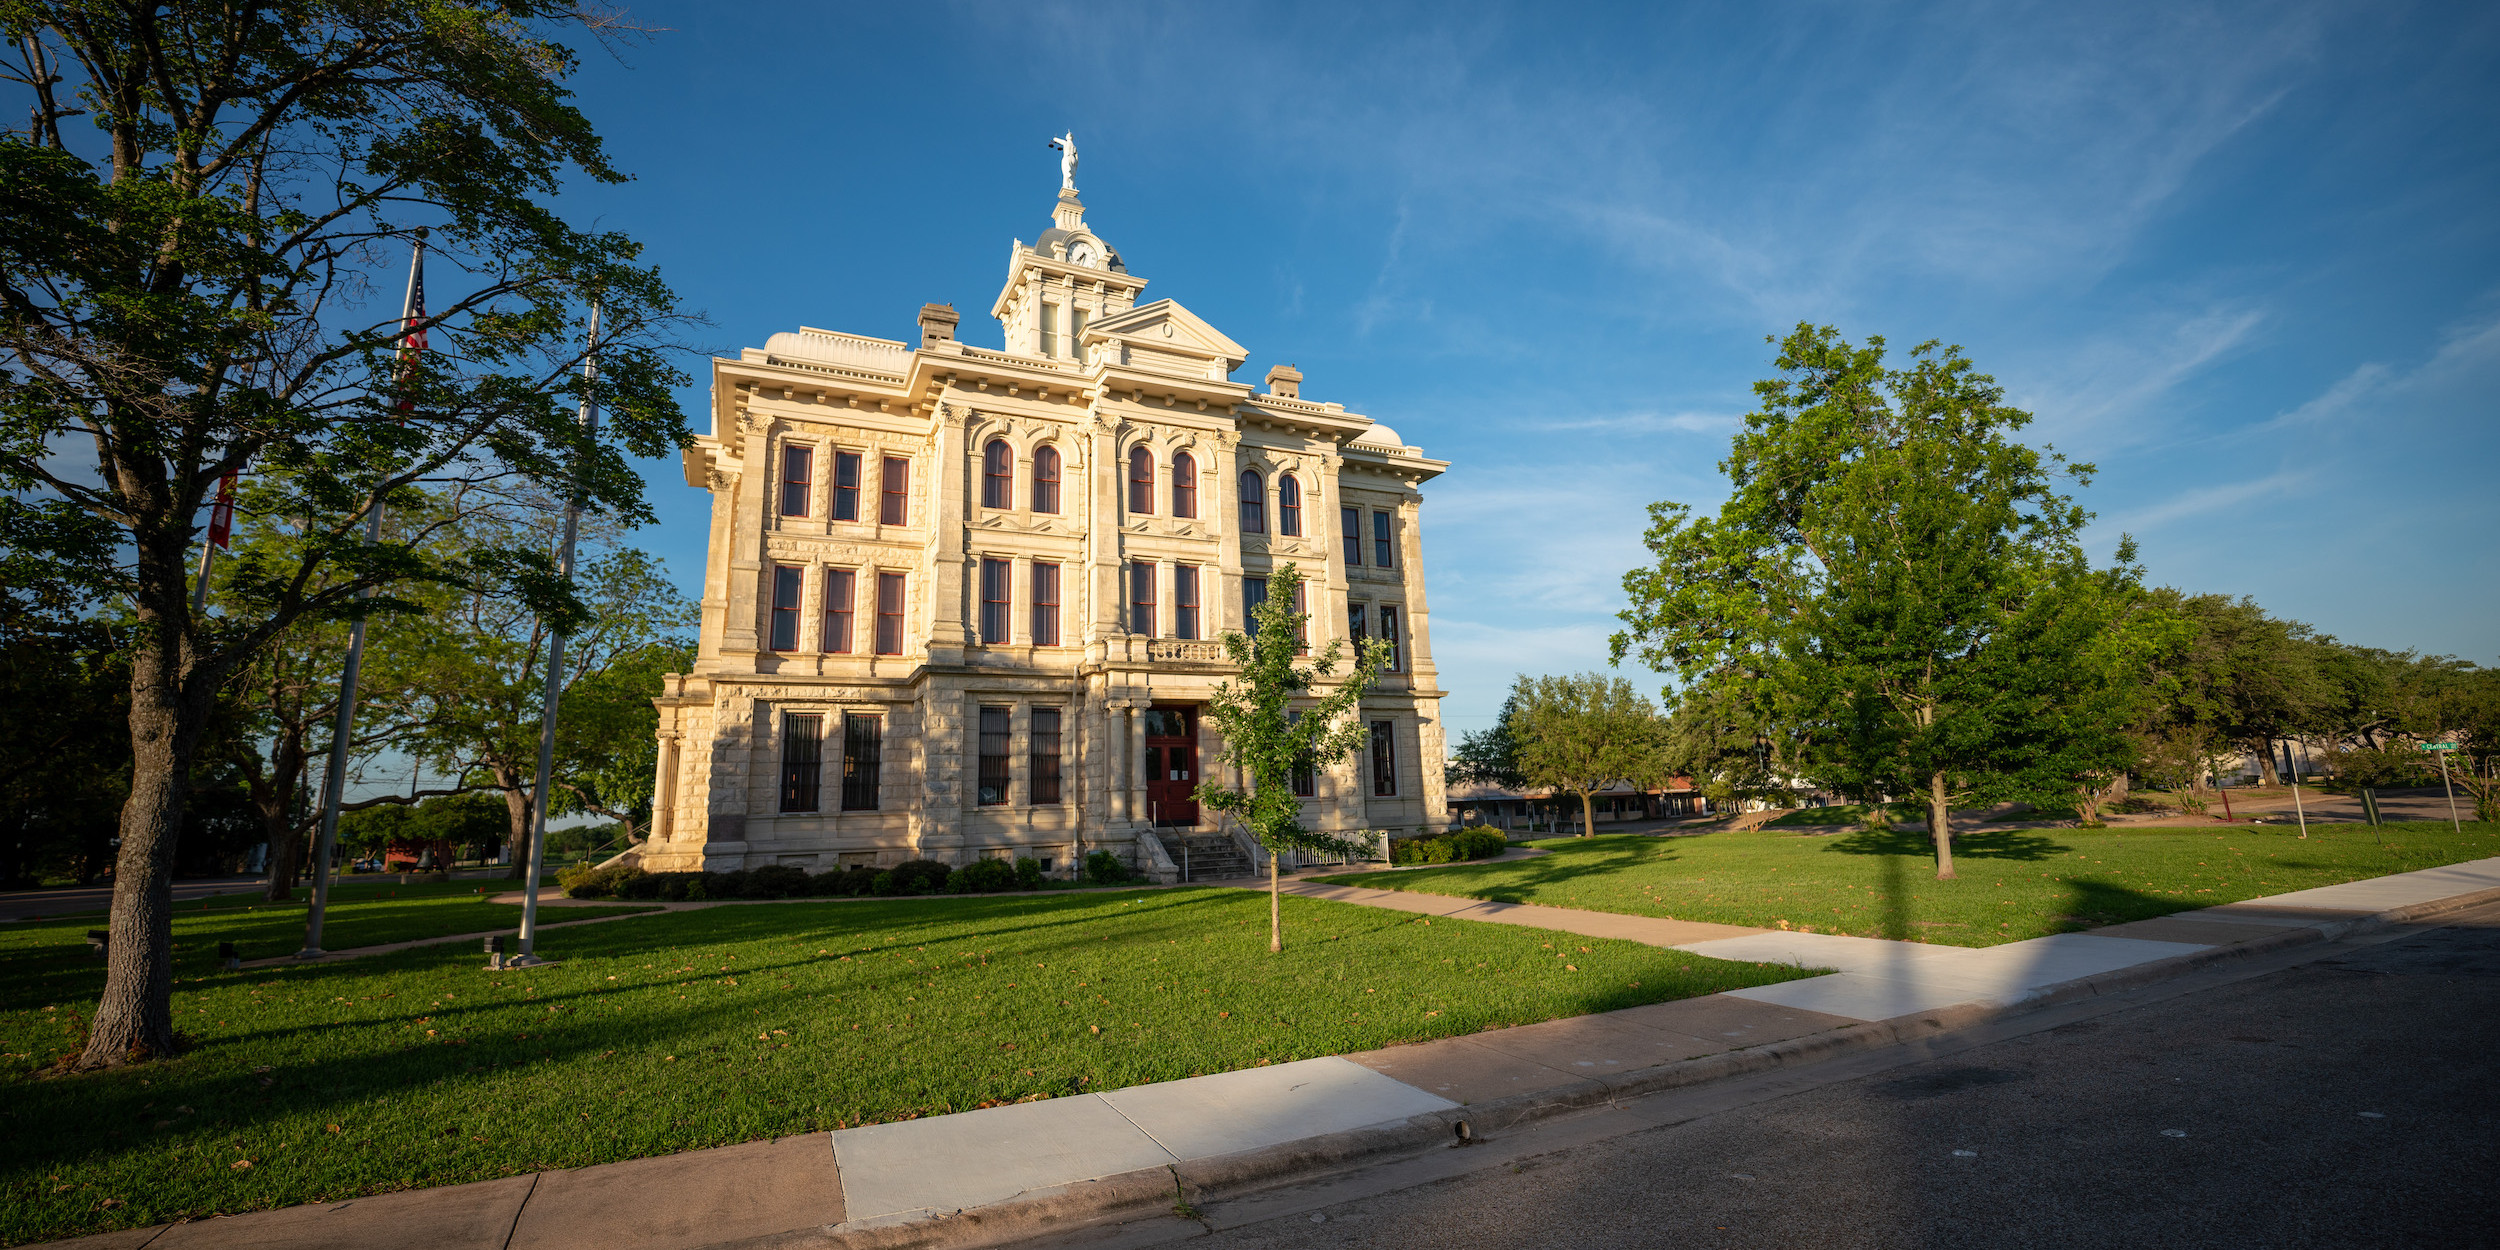 Street view of the courthouse with the sun setting